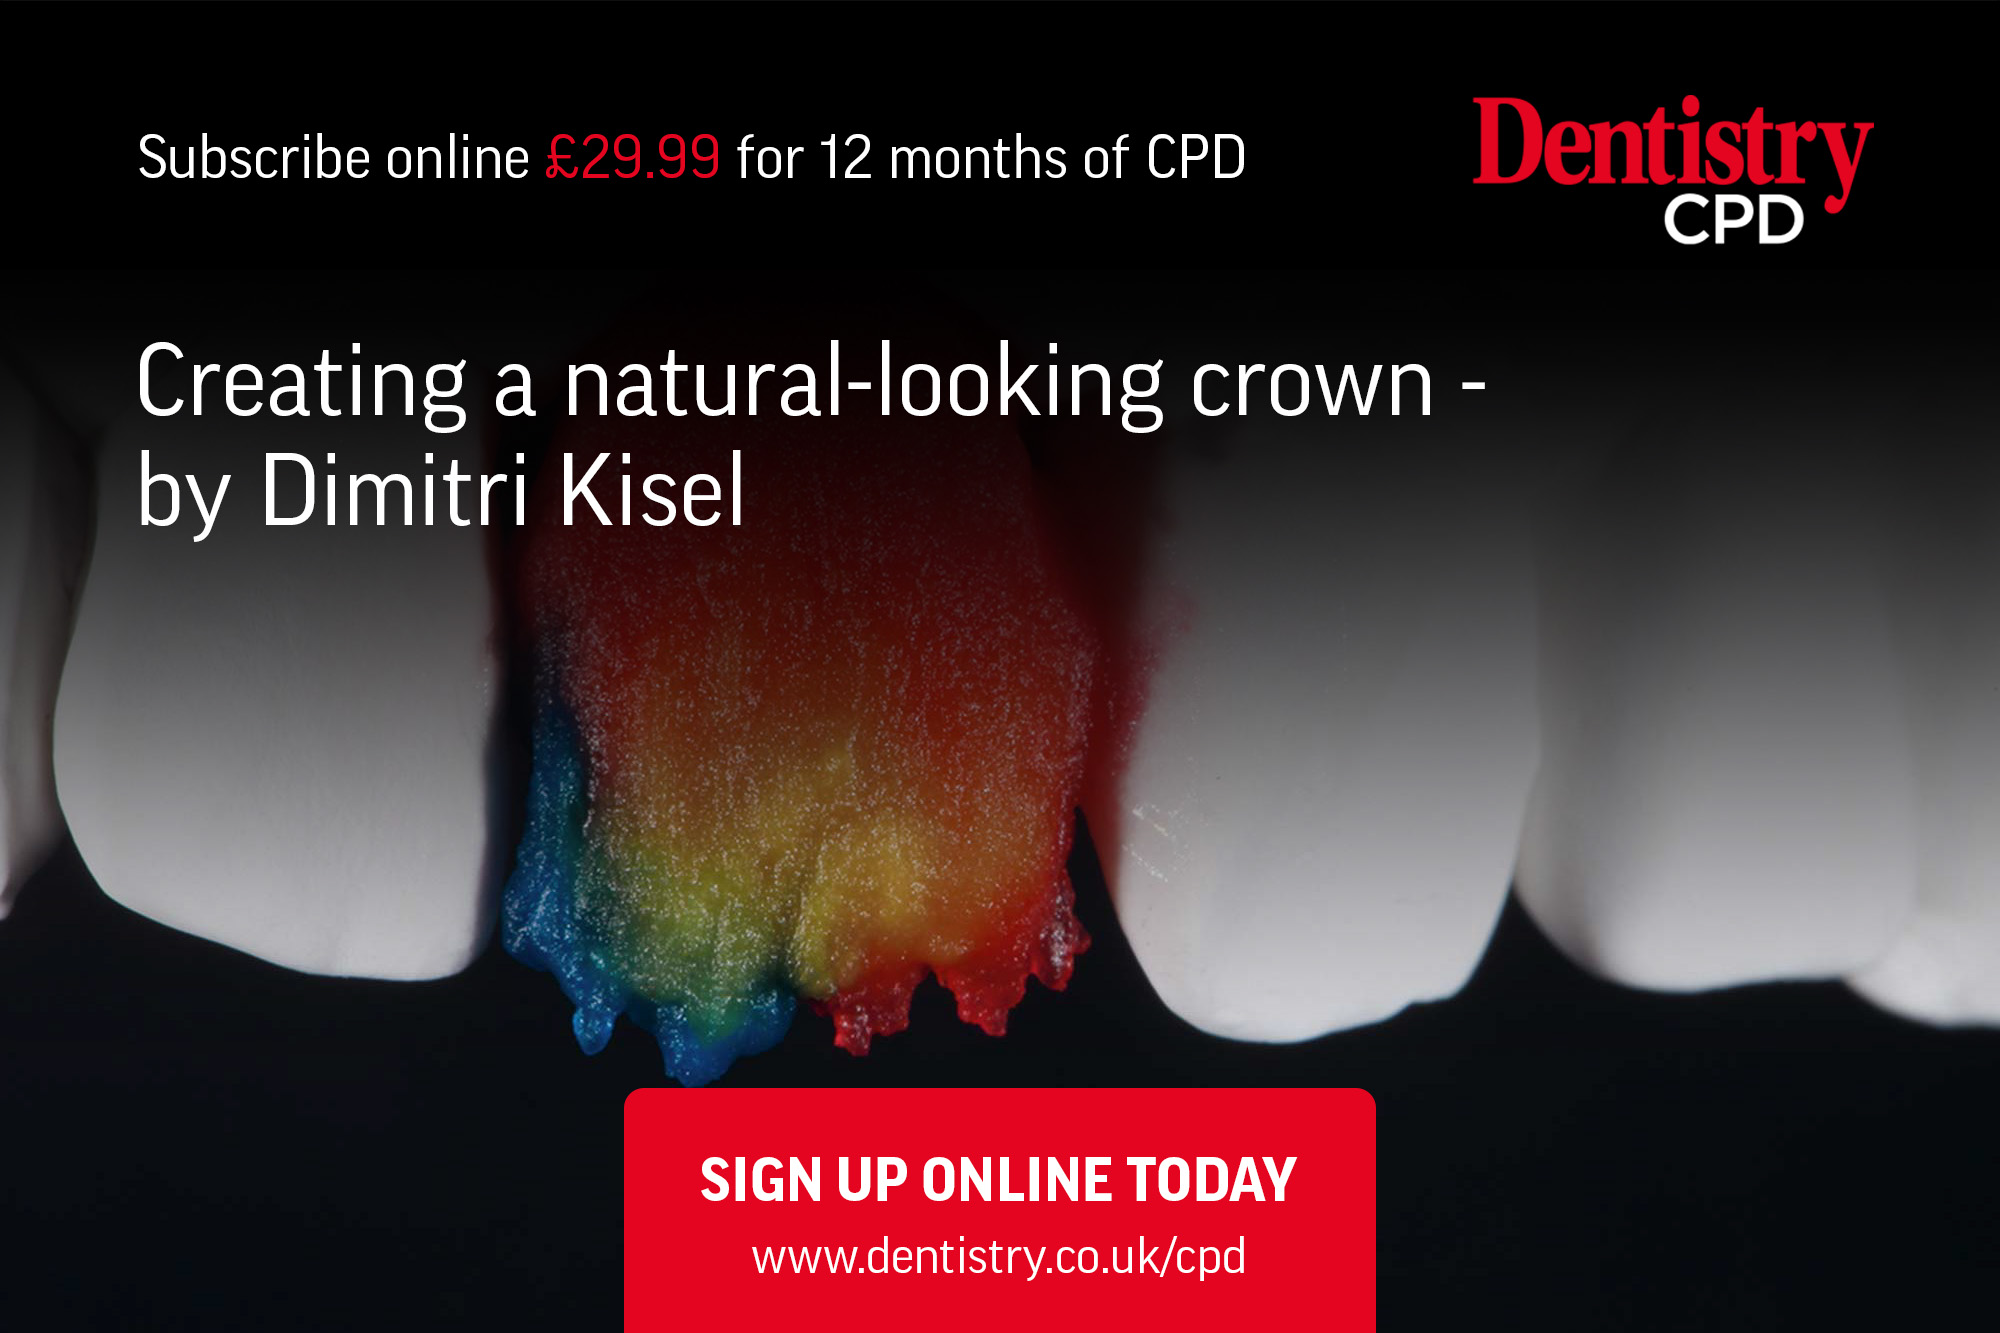 Dimitri Kisel explores how the combination of correct shade and shape brought about a natural looking crown following a challenging implant restoration involving a right upper central incisor.